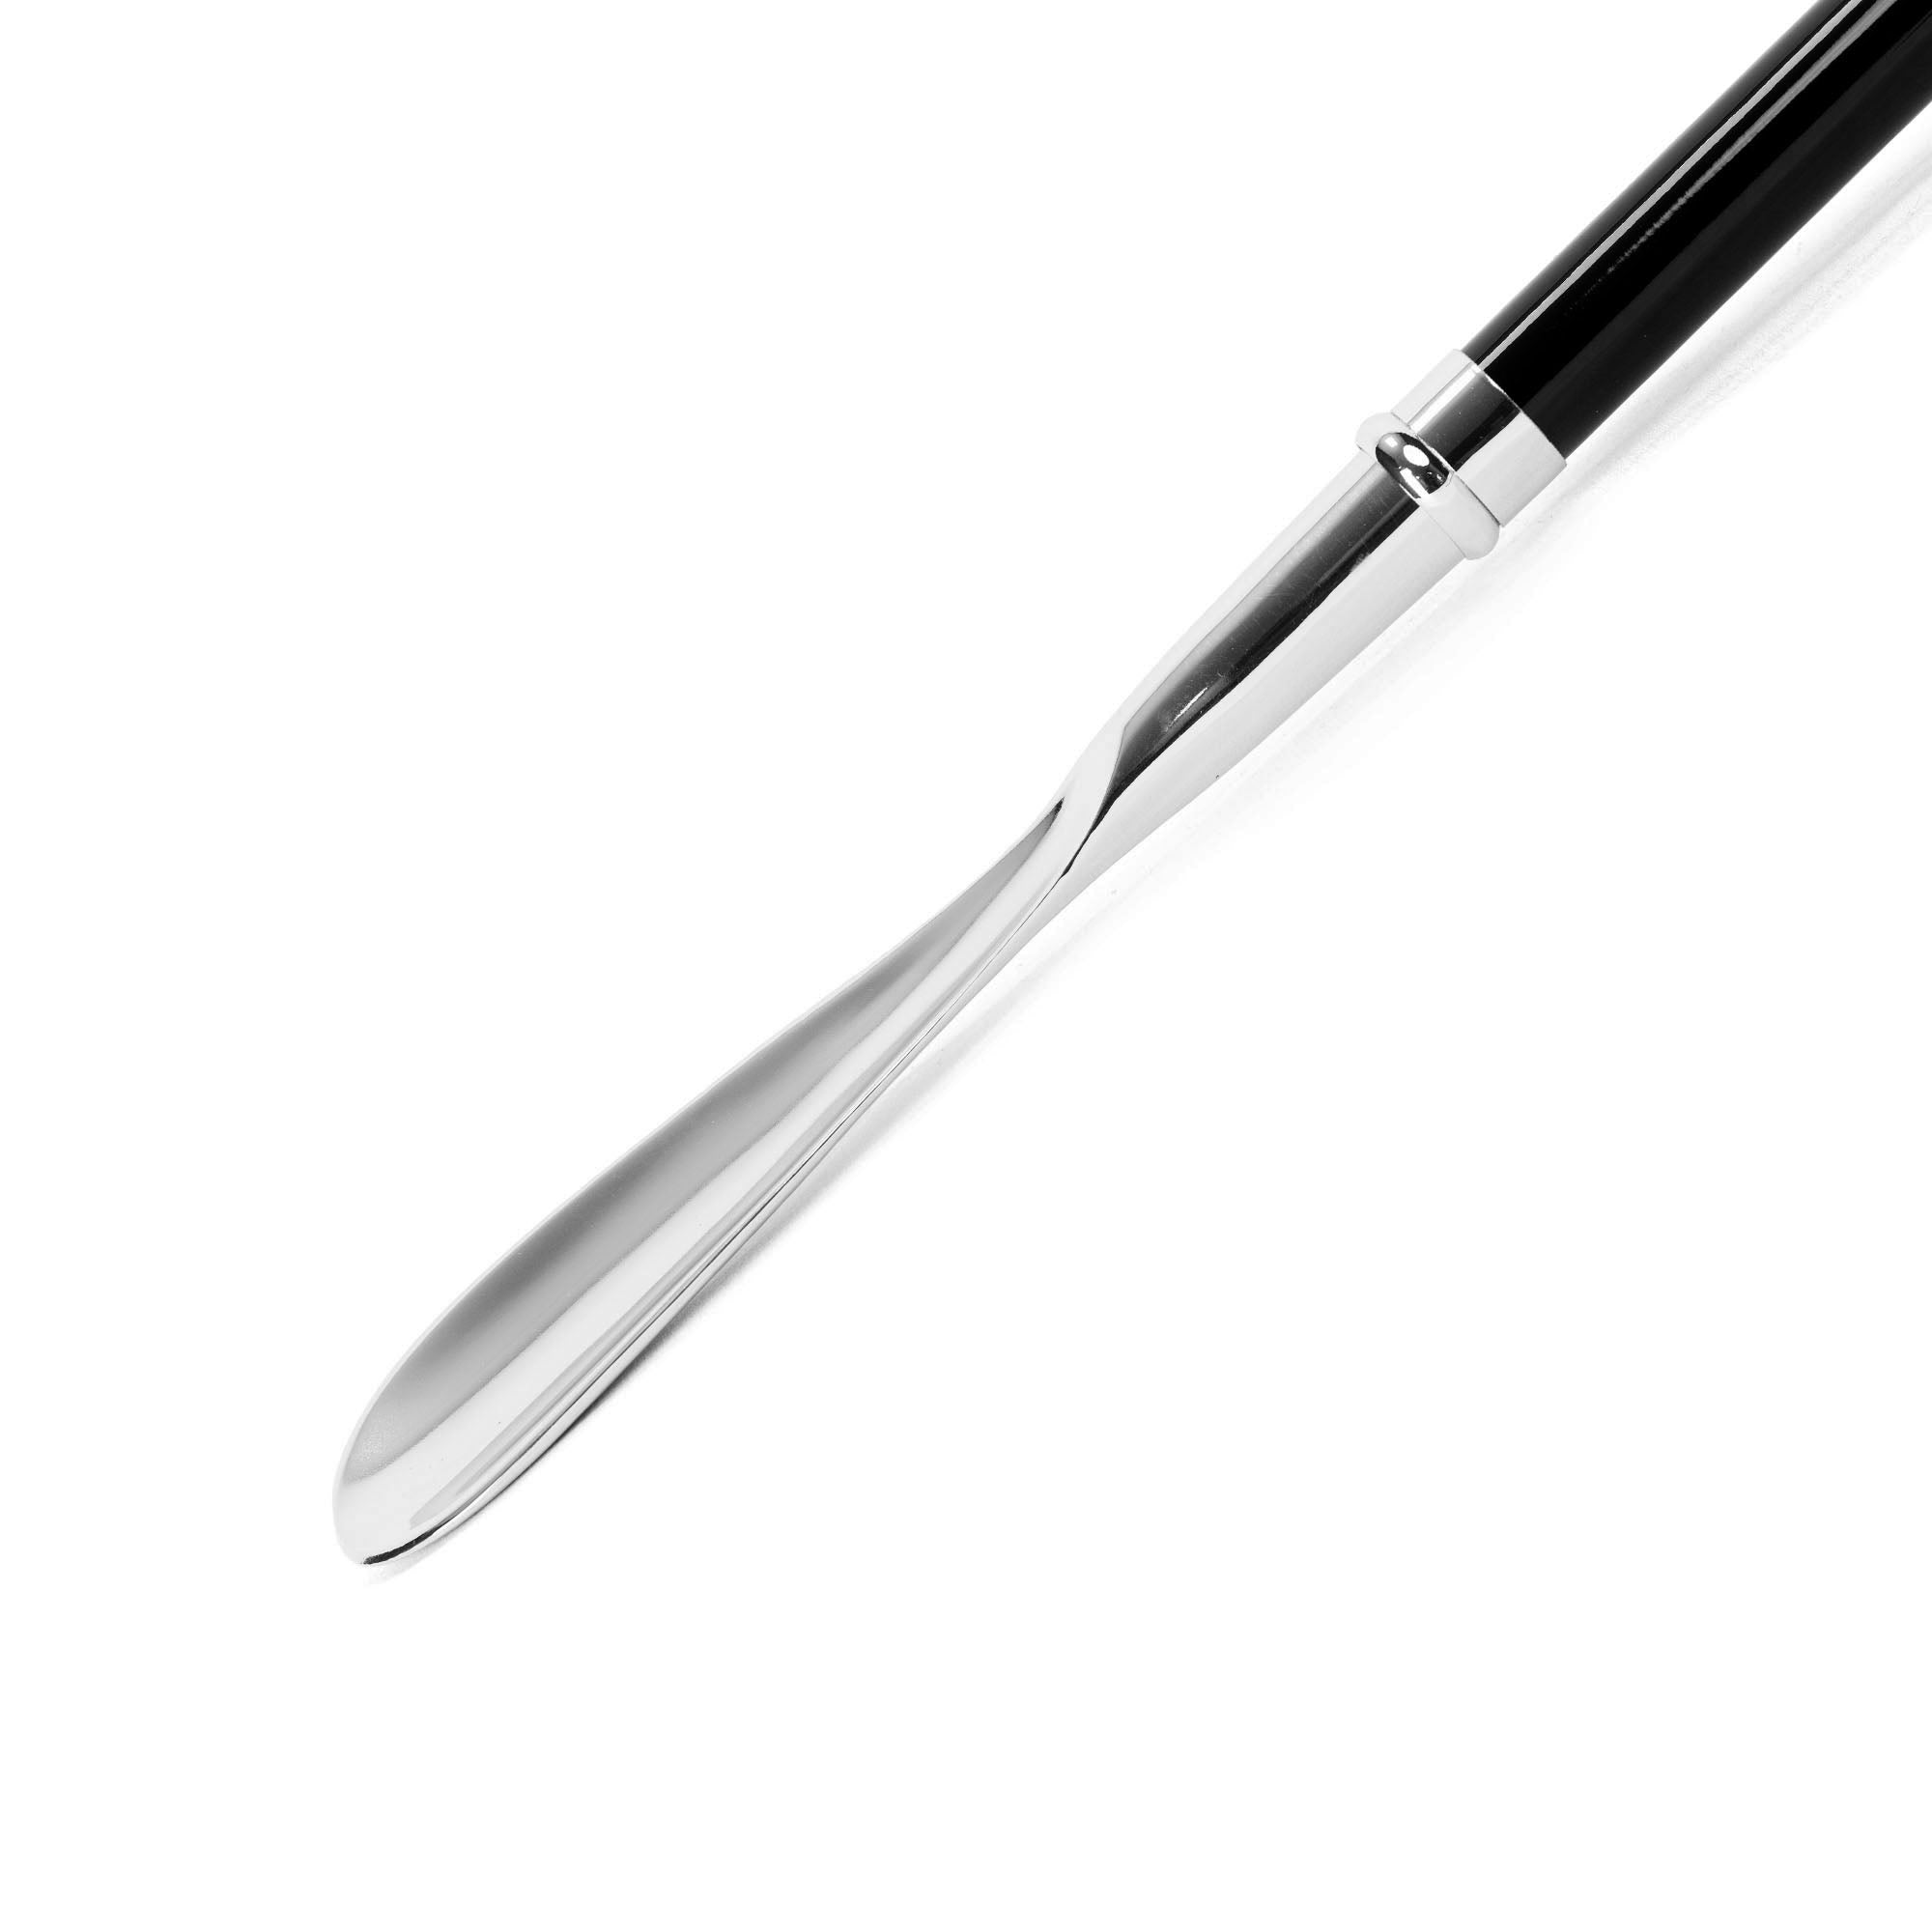 Exclusive Eagle shoehorn - Silverplated 925